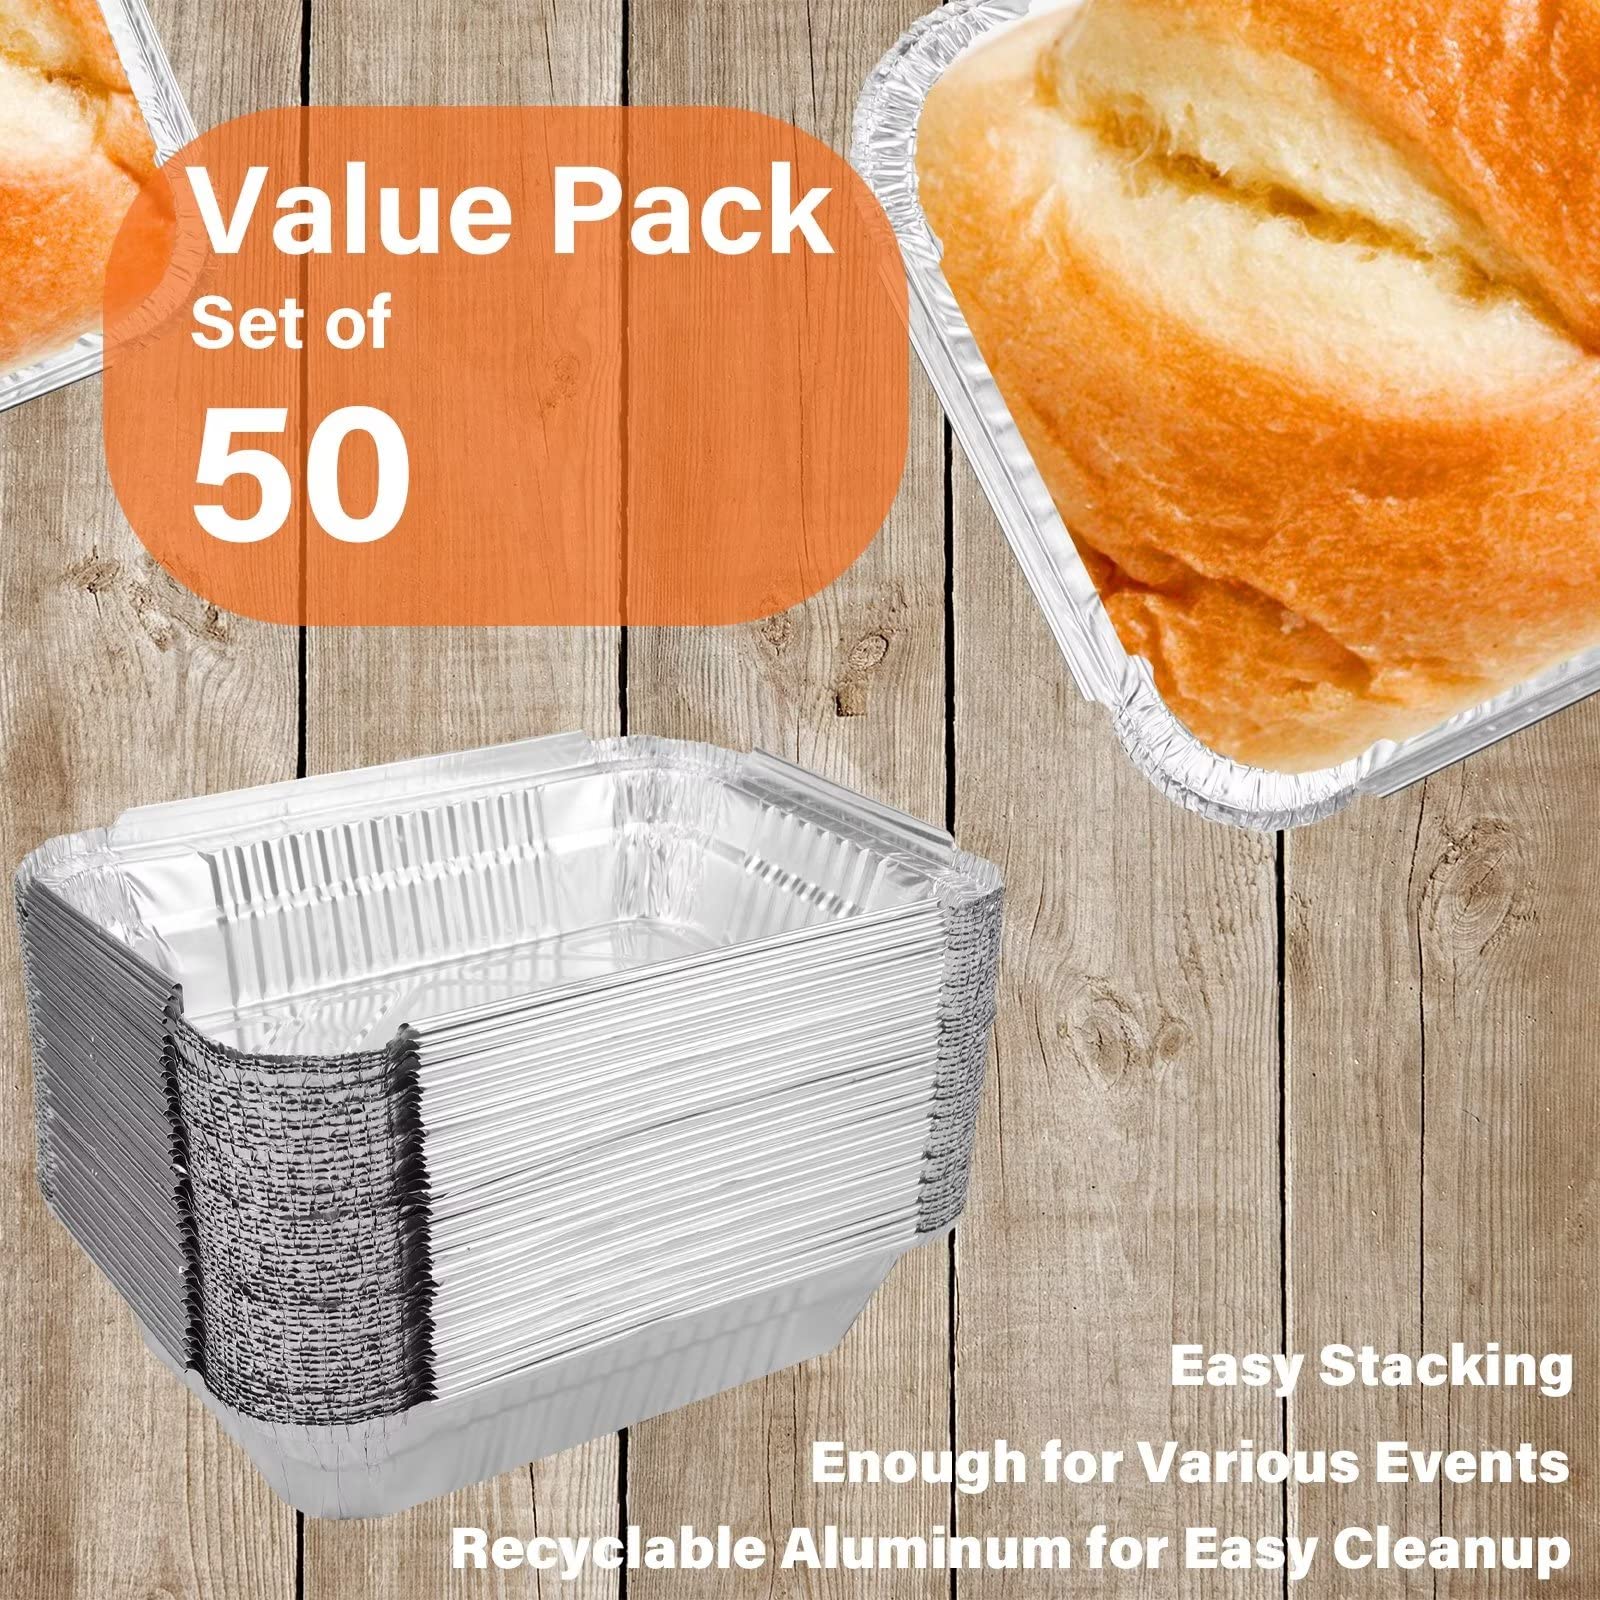 lsshao Disposable Takeout Aluminum Foil Pans with Lid Baking Pans (50 pack) Tin Food Storage Food Containers with Seal for Freshness,Great for Cooking, Heating, Storing, Prepping Food 8.5x6-2.25lb